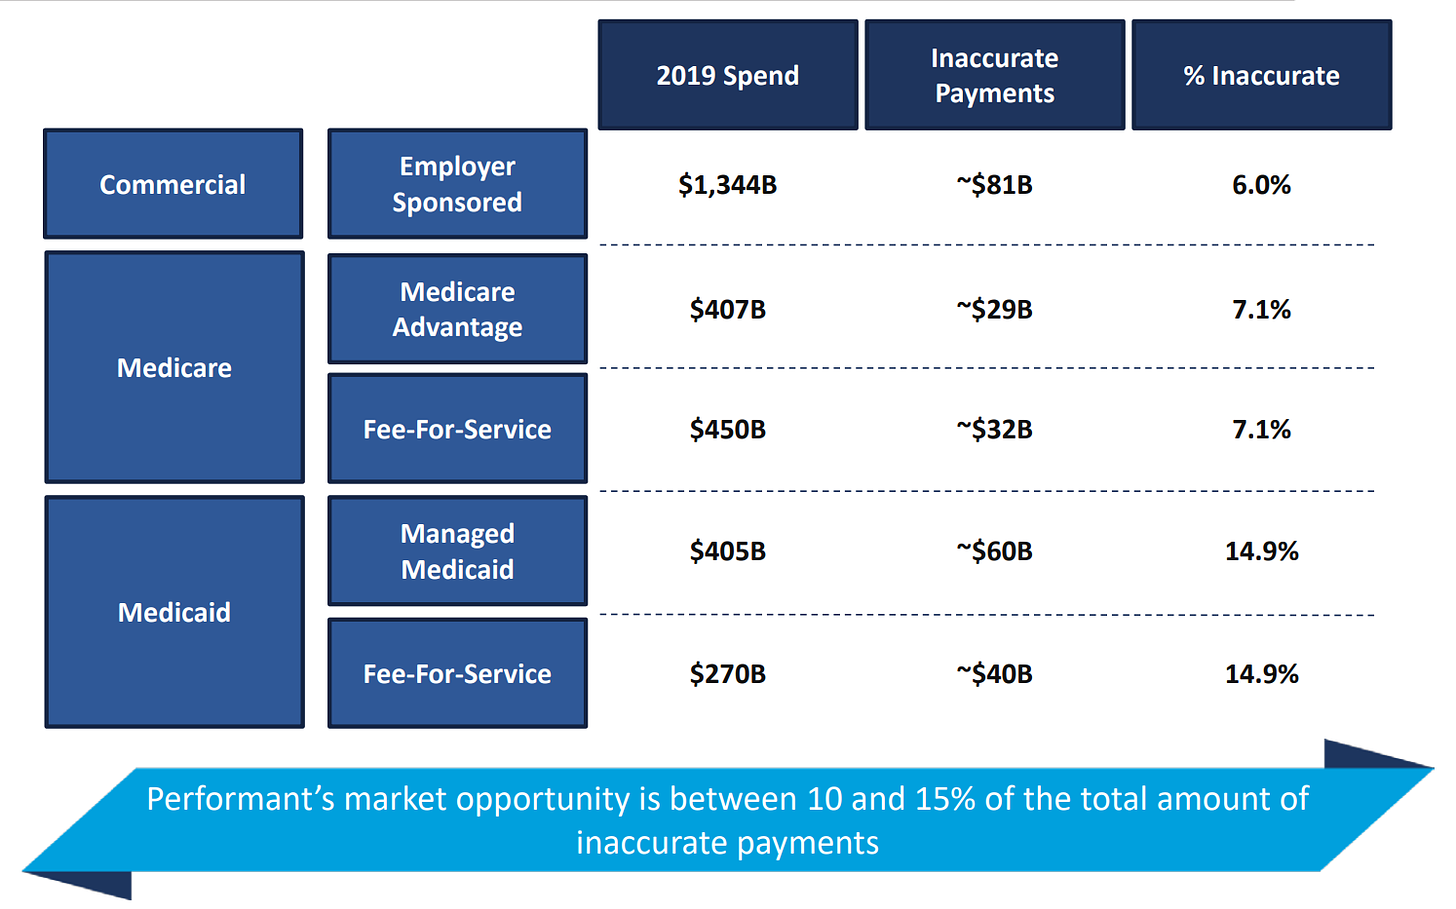 Employer 
Commercial 
Sponsored 
Medicare 
Advantage 
Medicare 
Fee-For-Service 
Managed 
Medicaid 
Medicaid 
Fee -For-Service 
2019 spend 
$1,344B 
5407B 
5450B 
5405B 
$270B 
Inaccurate 
Payments 
-$818 
-$298 
-$32B 
-$608 
-$408 
% Inaccurate 
6.0% 
7.1% 
7.1% 
14.9% 
14.9% 
Performant's market opportunity is between 10 and 15% of the total amount of 
inaccurate payments 